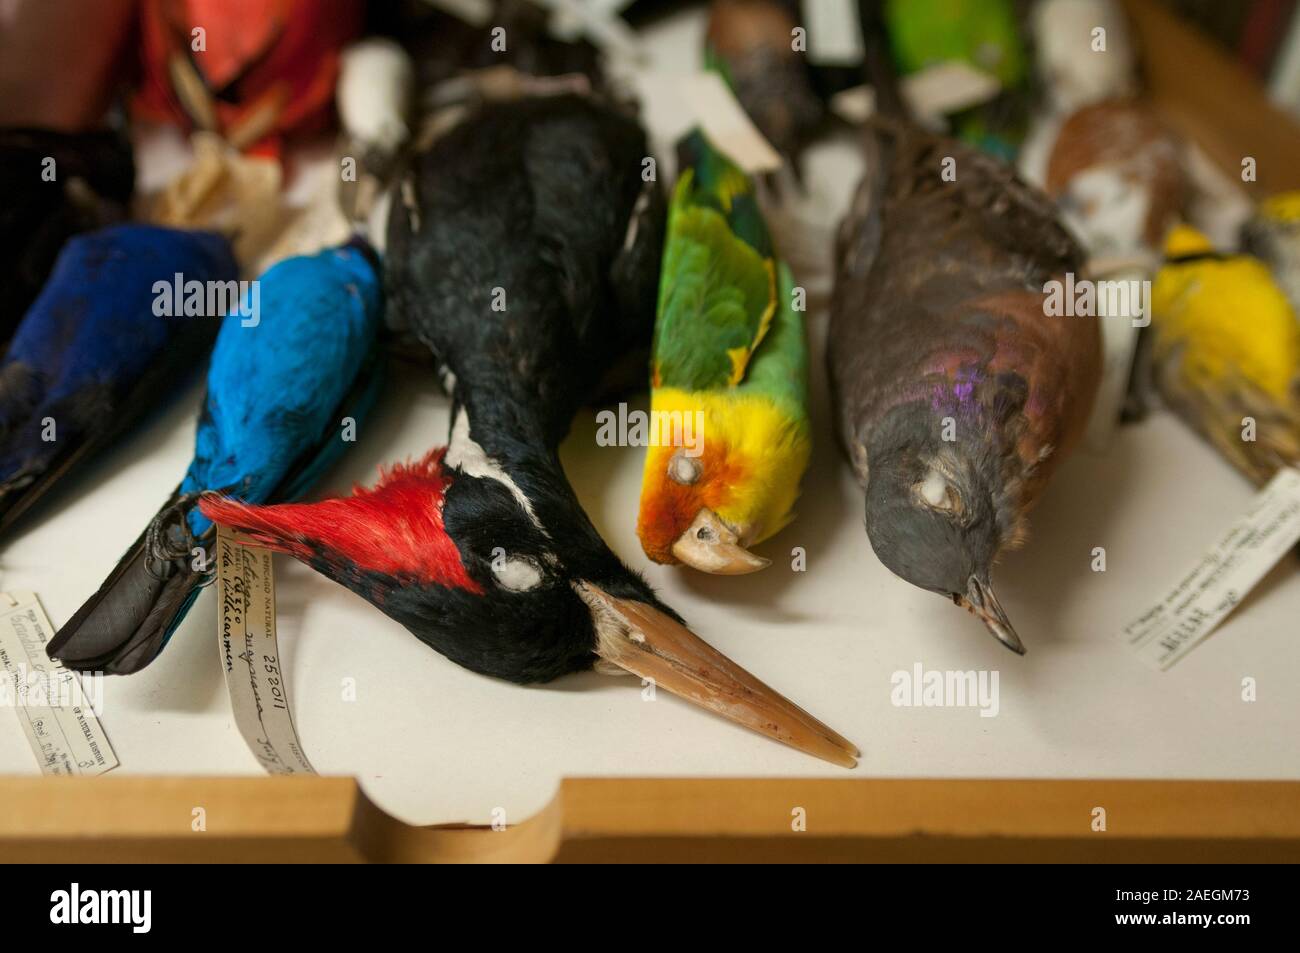 Specimens of extinct birds in the Field Museum of Natural History, Chicago, USA. L to R: Ivory-billed Woodpecker, Carolina Parakeet, Passenger Pigeon. Stock Photo